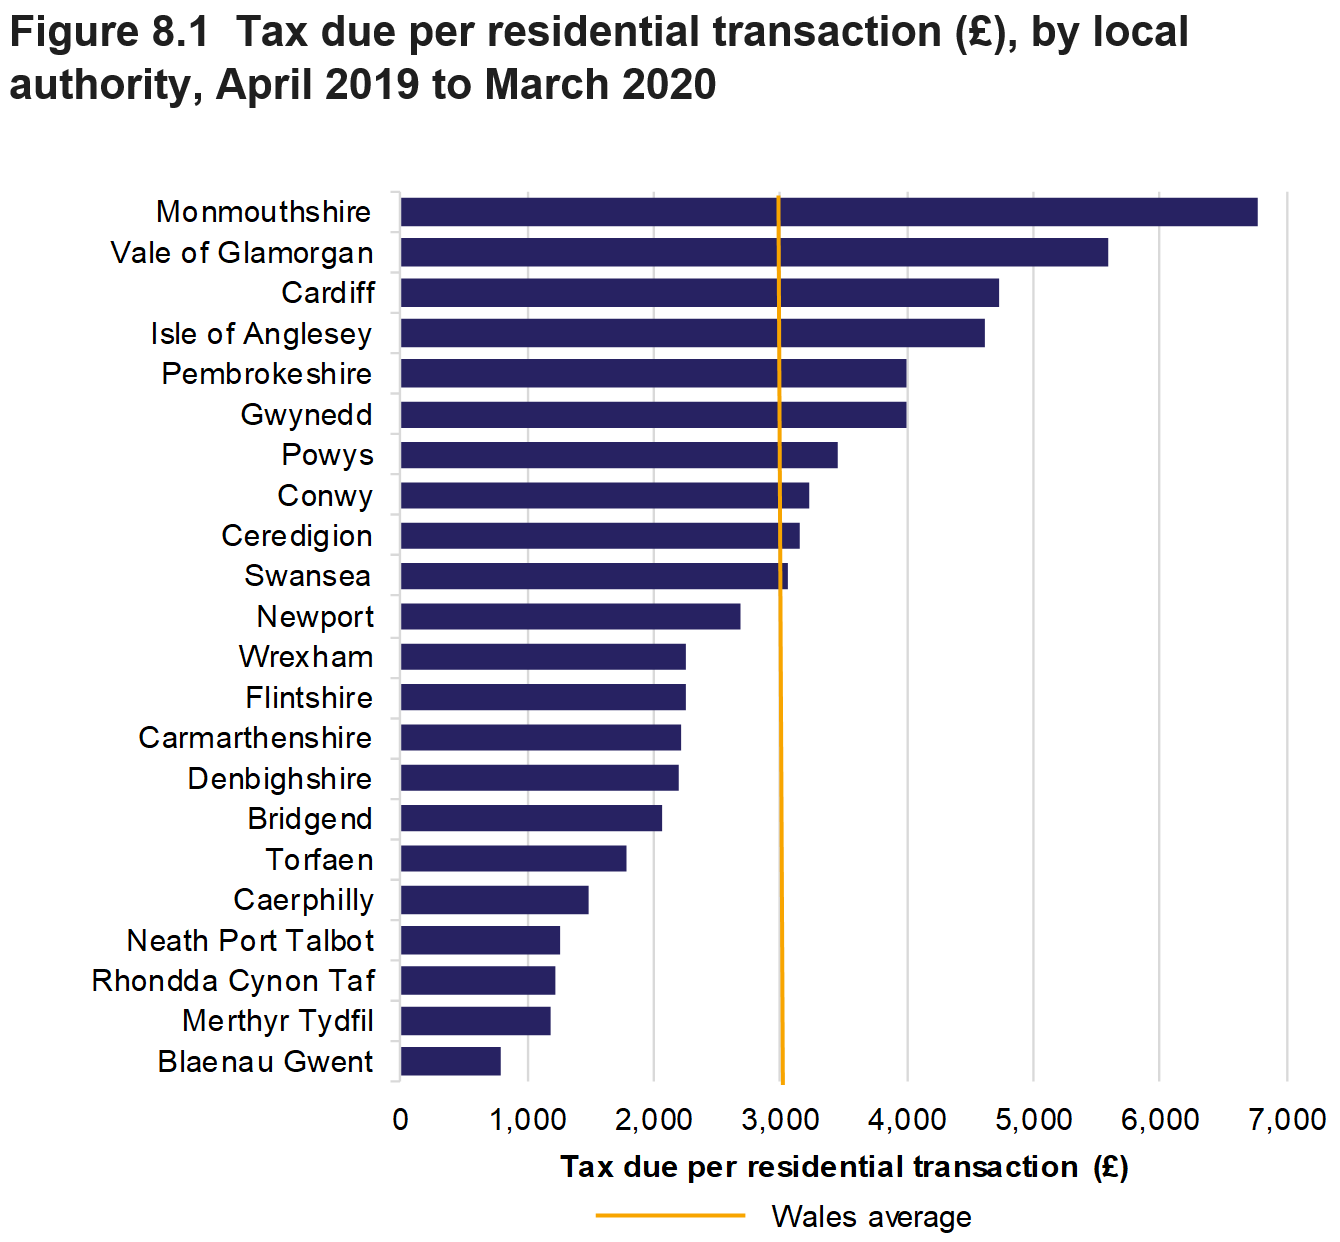 Figure 8.1 shows for residential transactions: the amount of tax due per transaction for all local authorities and a Wales average, April 2019 to March 2020.